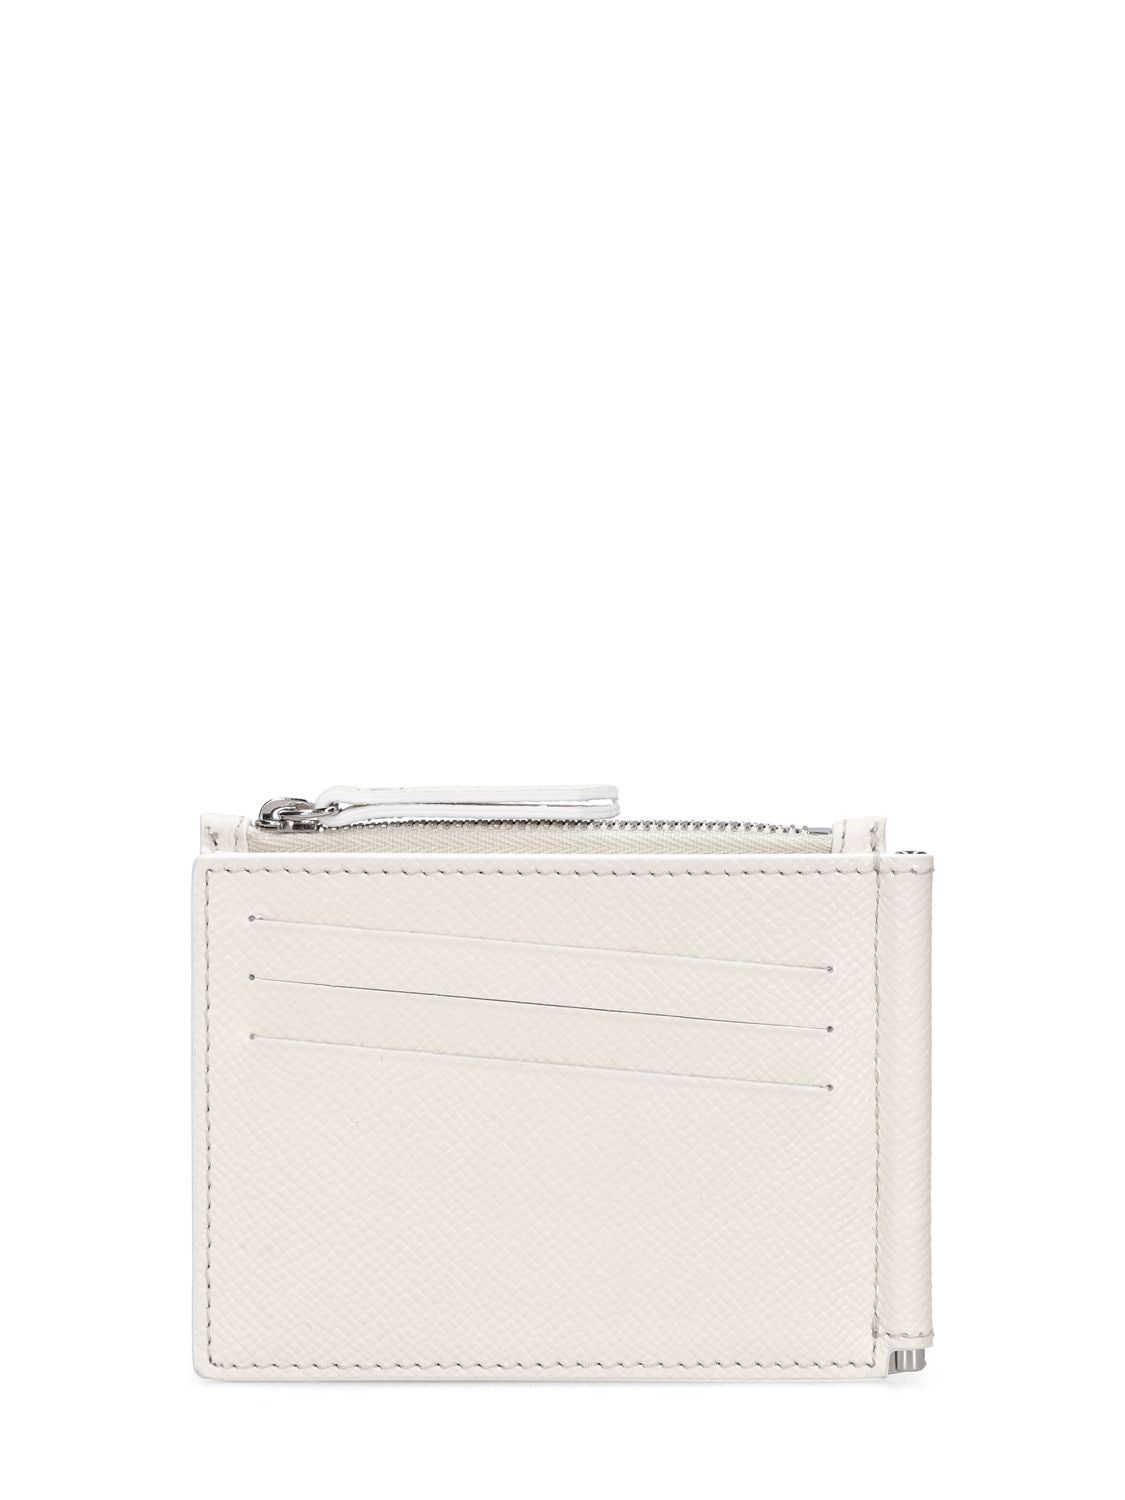 Maison Margiela Grained Leather Wallet In White